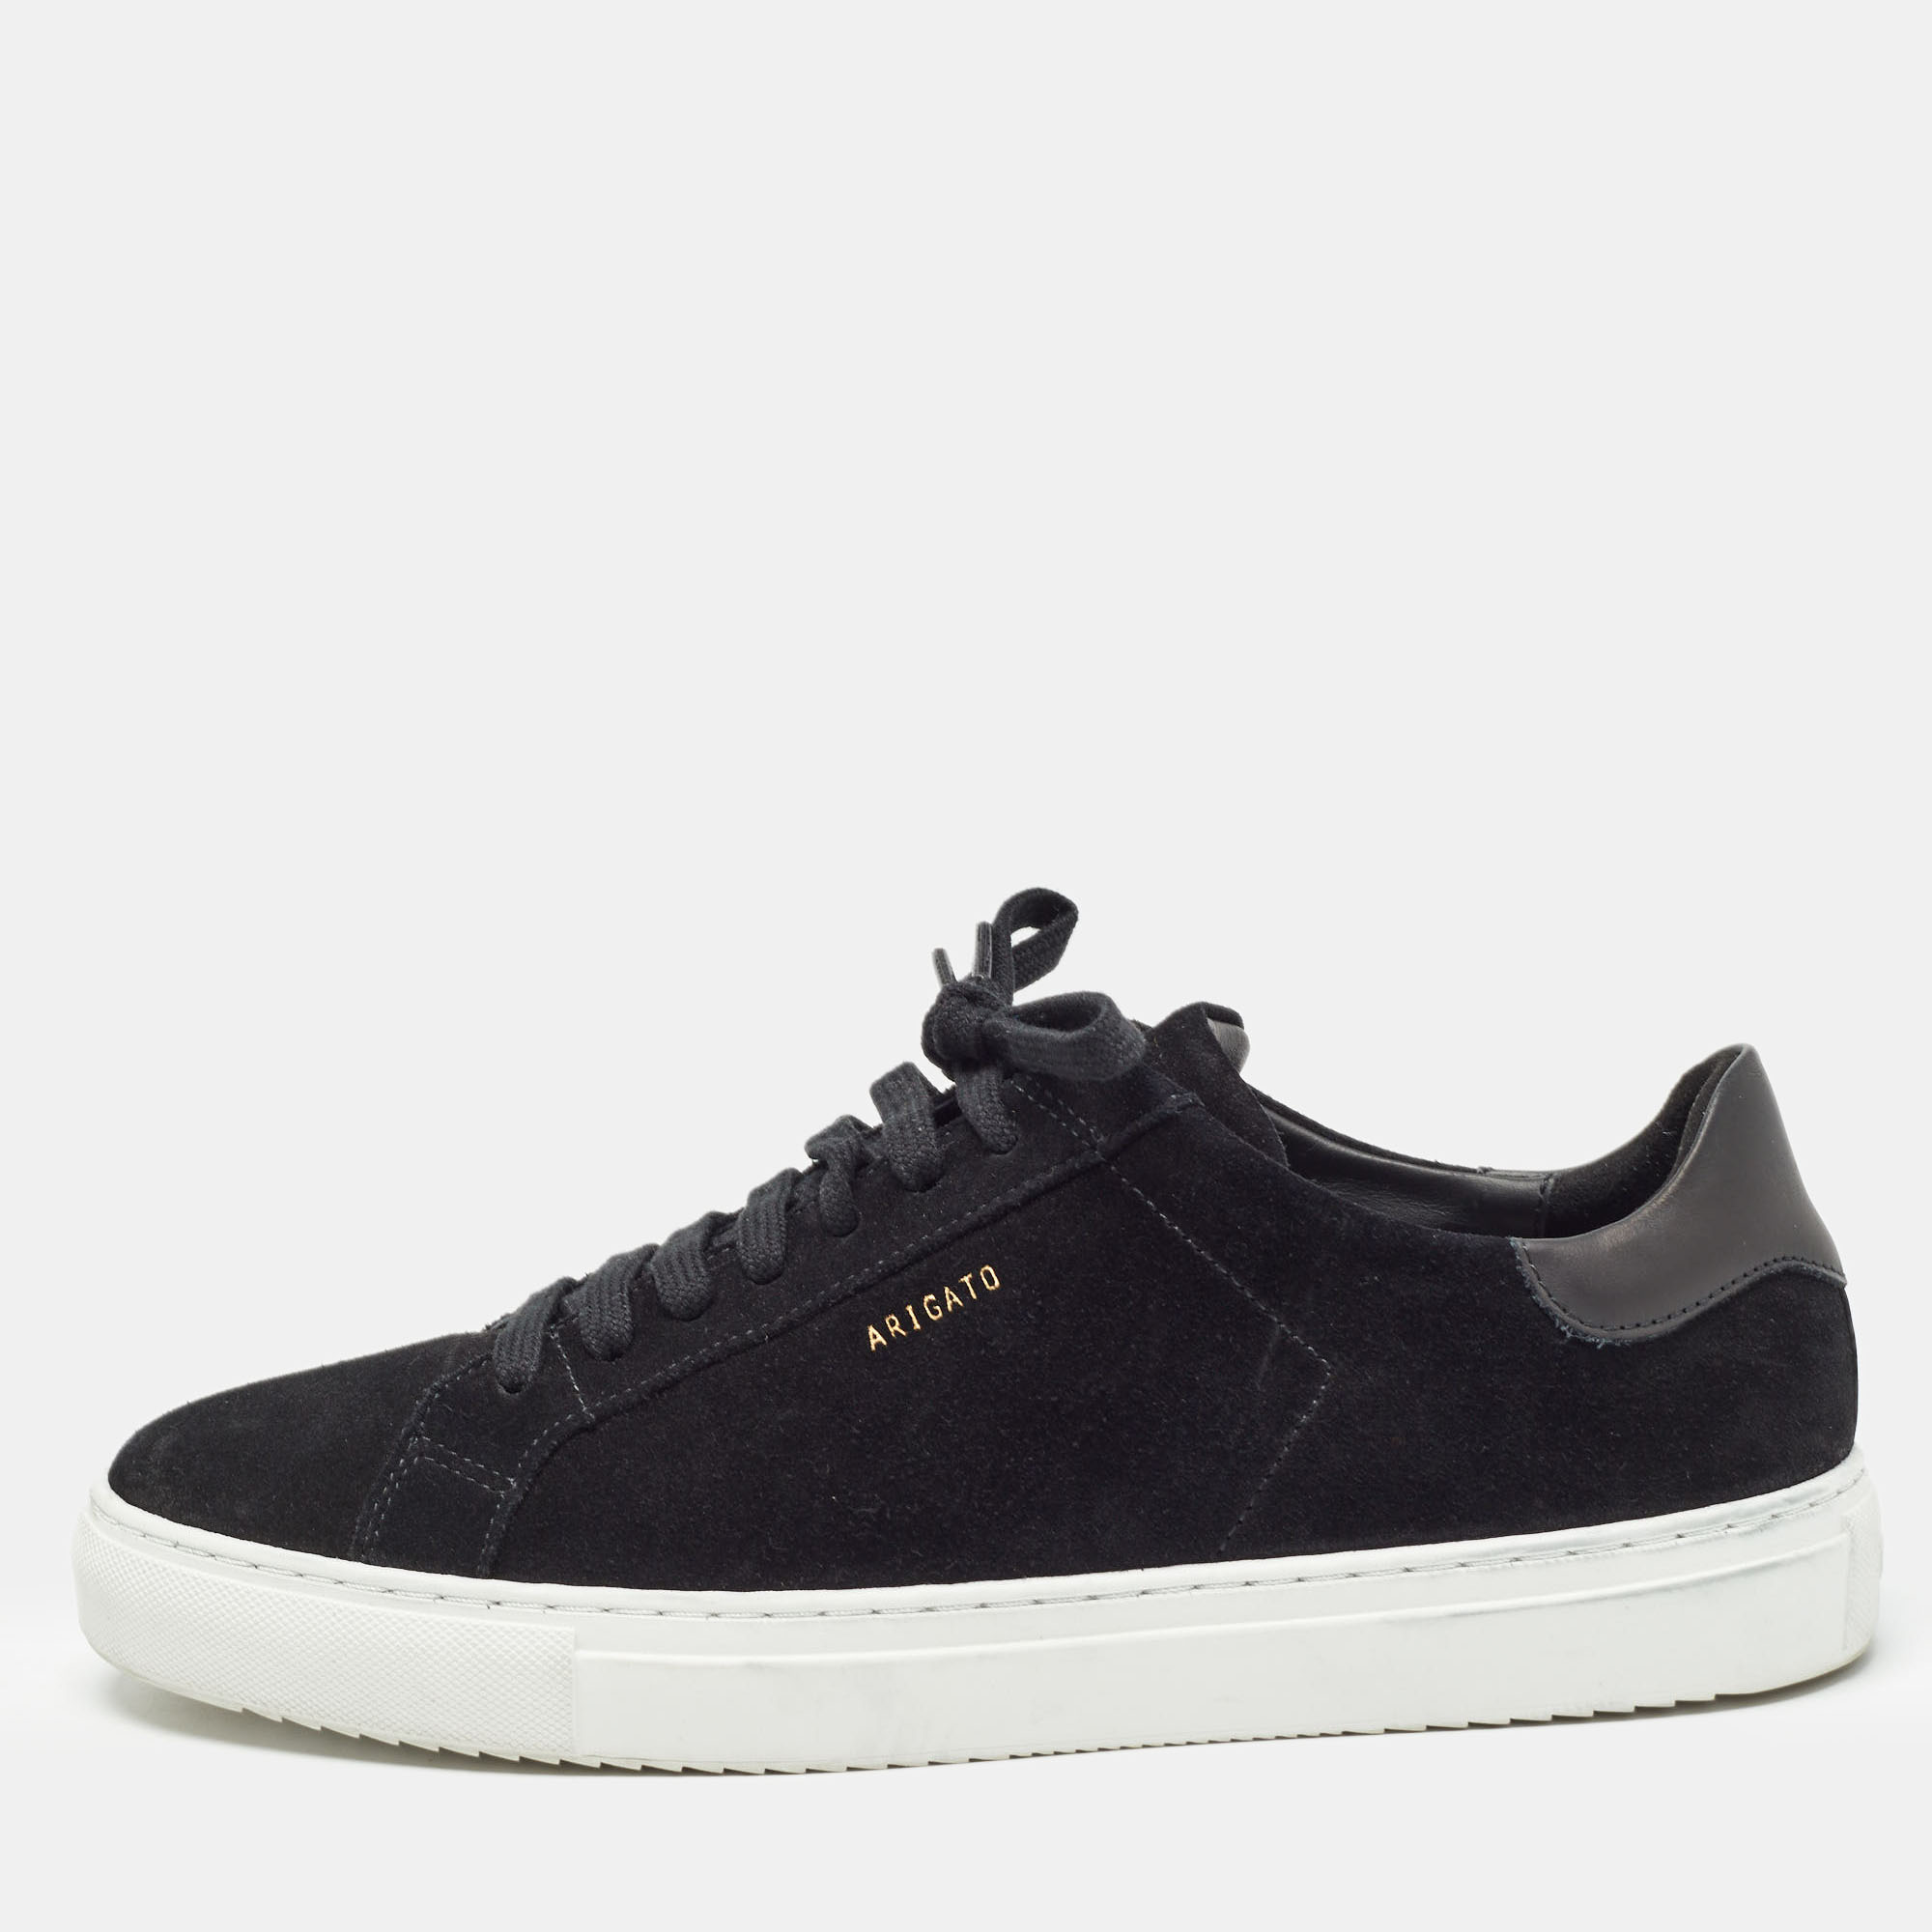 

Axel Arigato Black Suede and Leather Low Top Sneakers Size